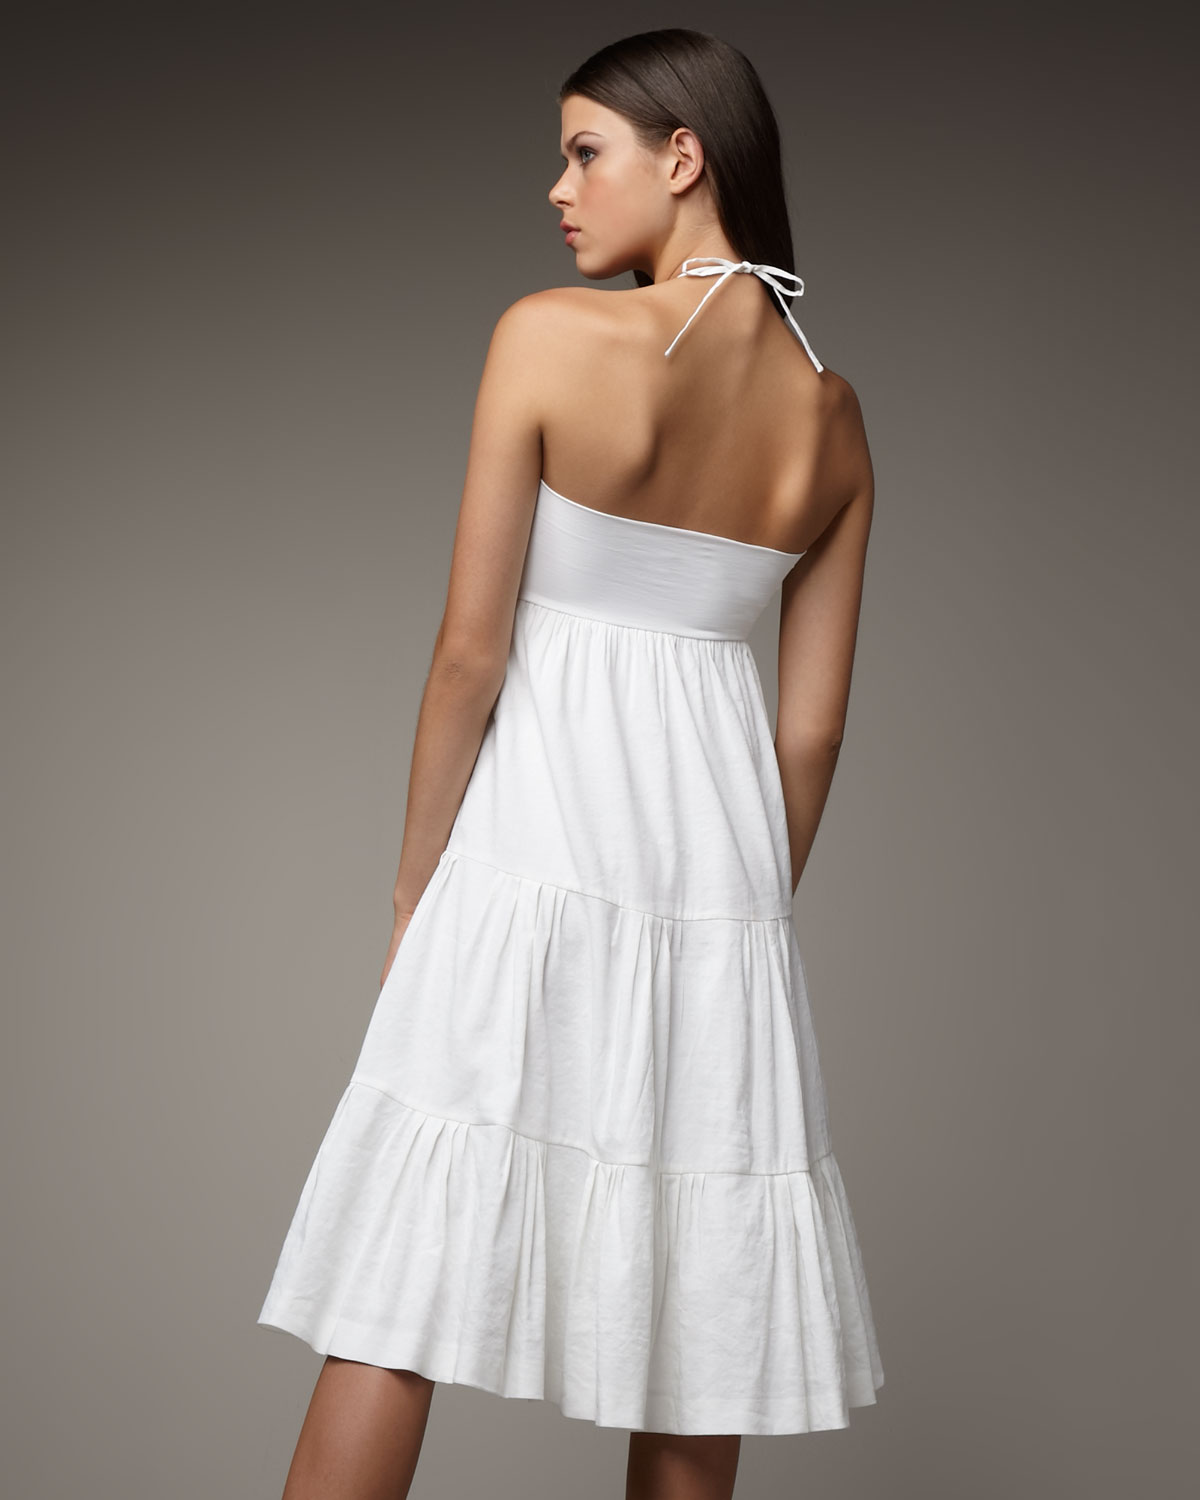 Lyst - Theory Tiered Halter Dress in White